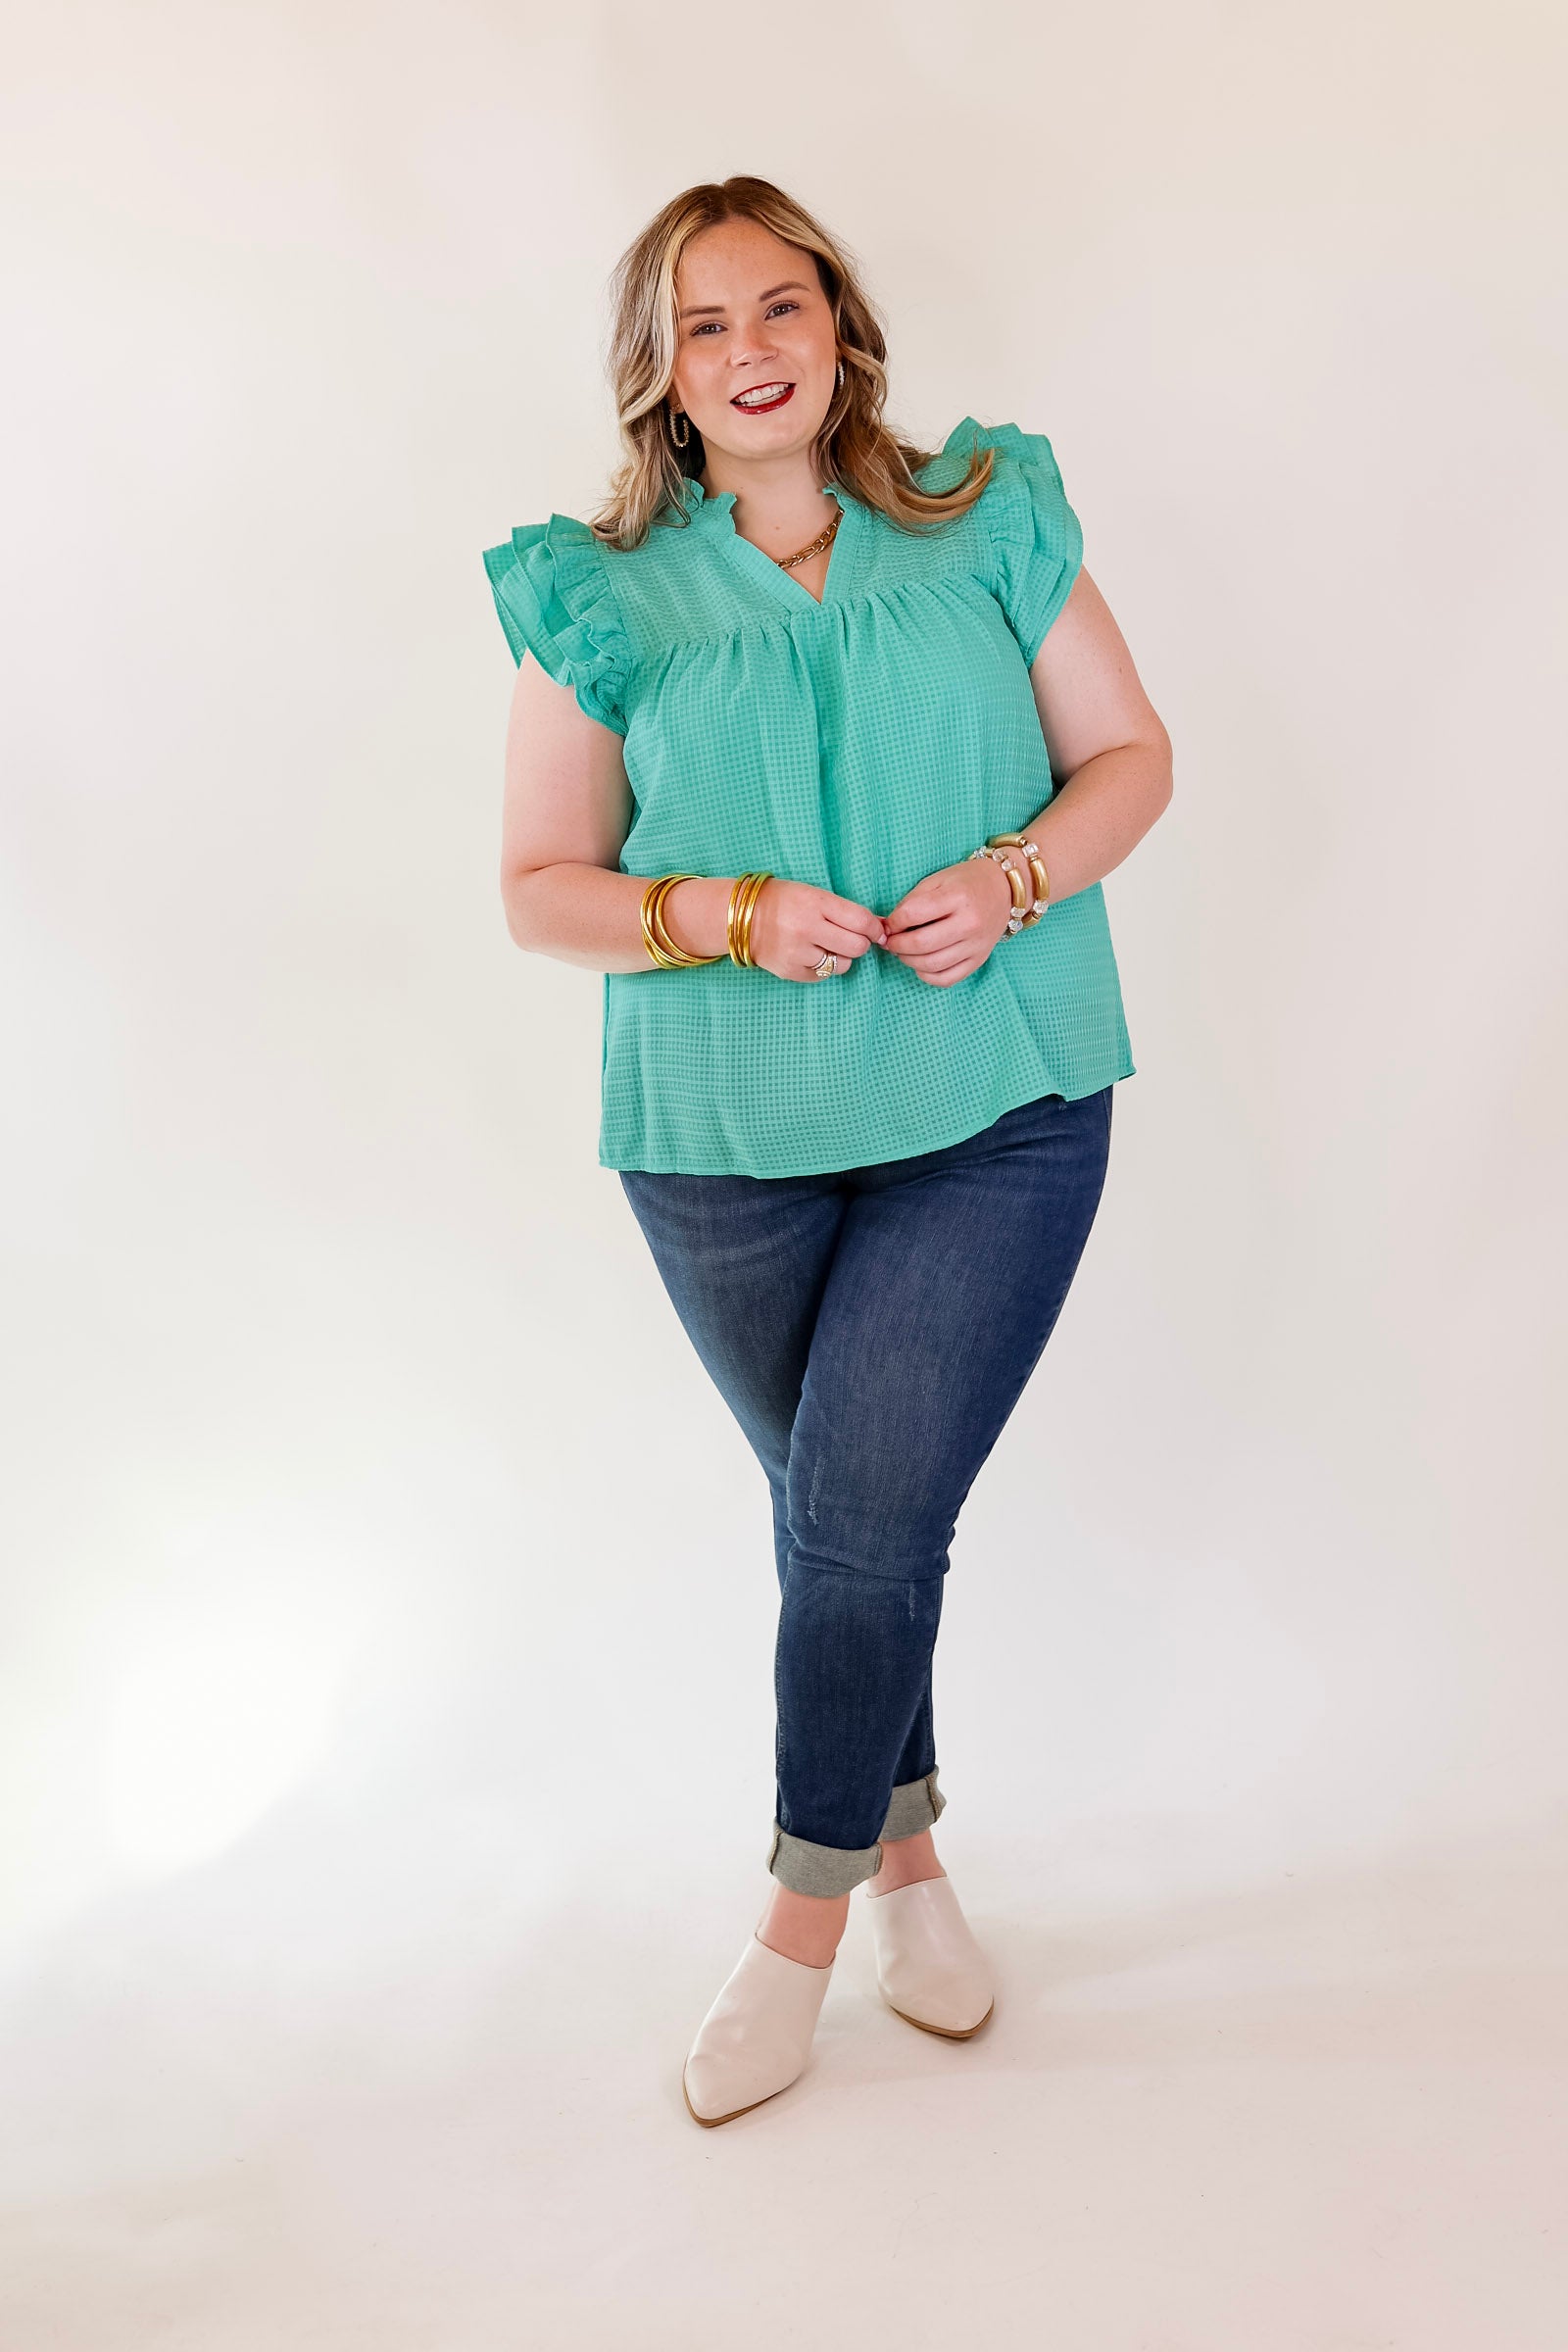 Perfectly Fabulous Ruffle Cap Sleeve Top in Mint Green - Giddy Up Glamour Boutique